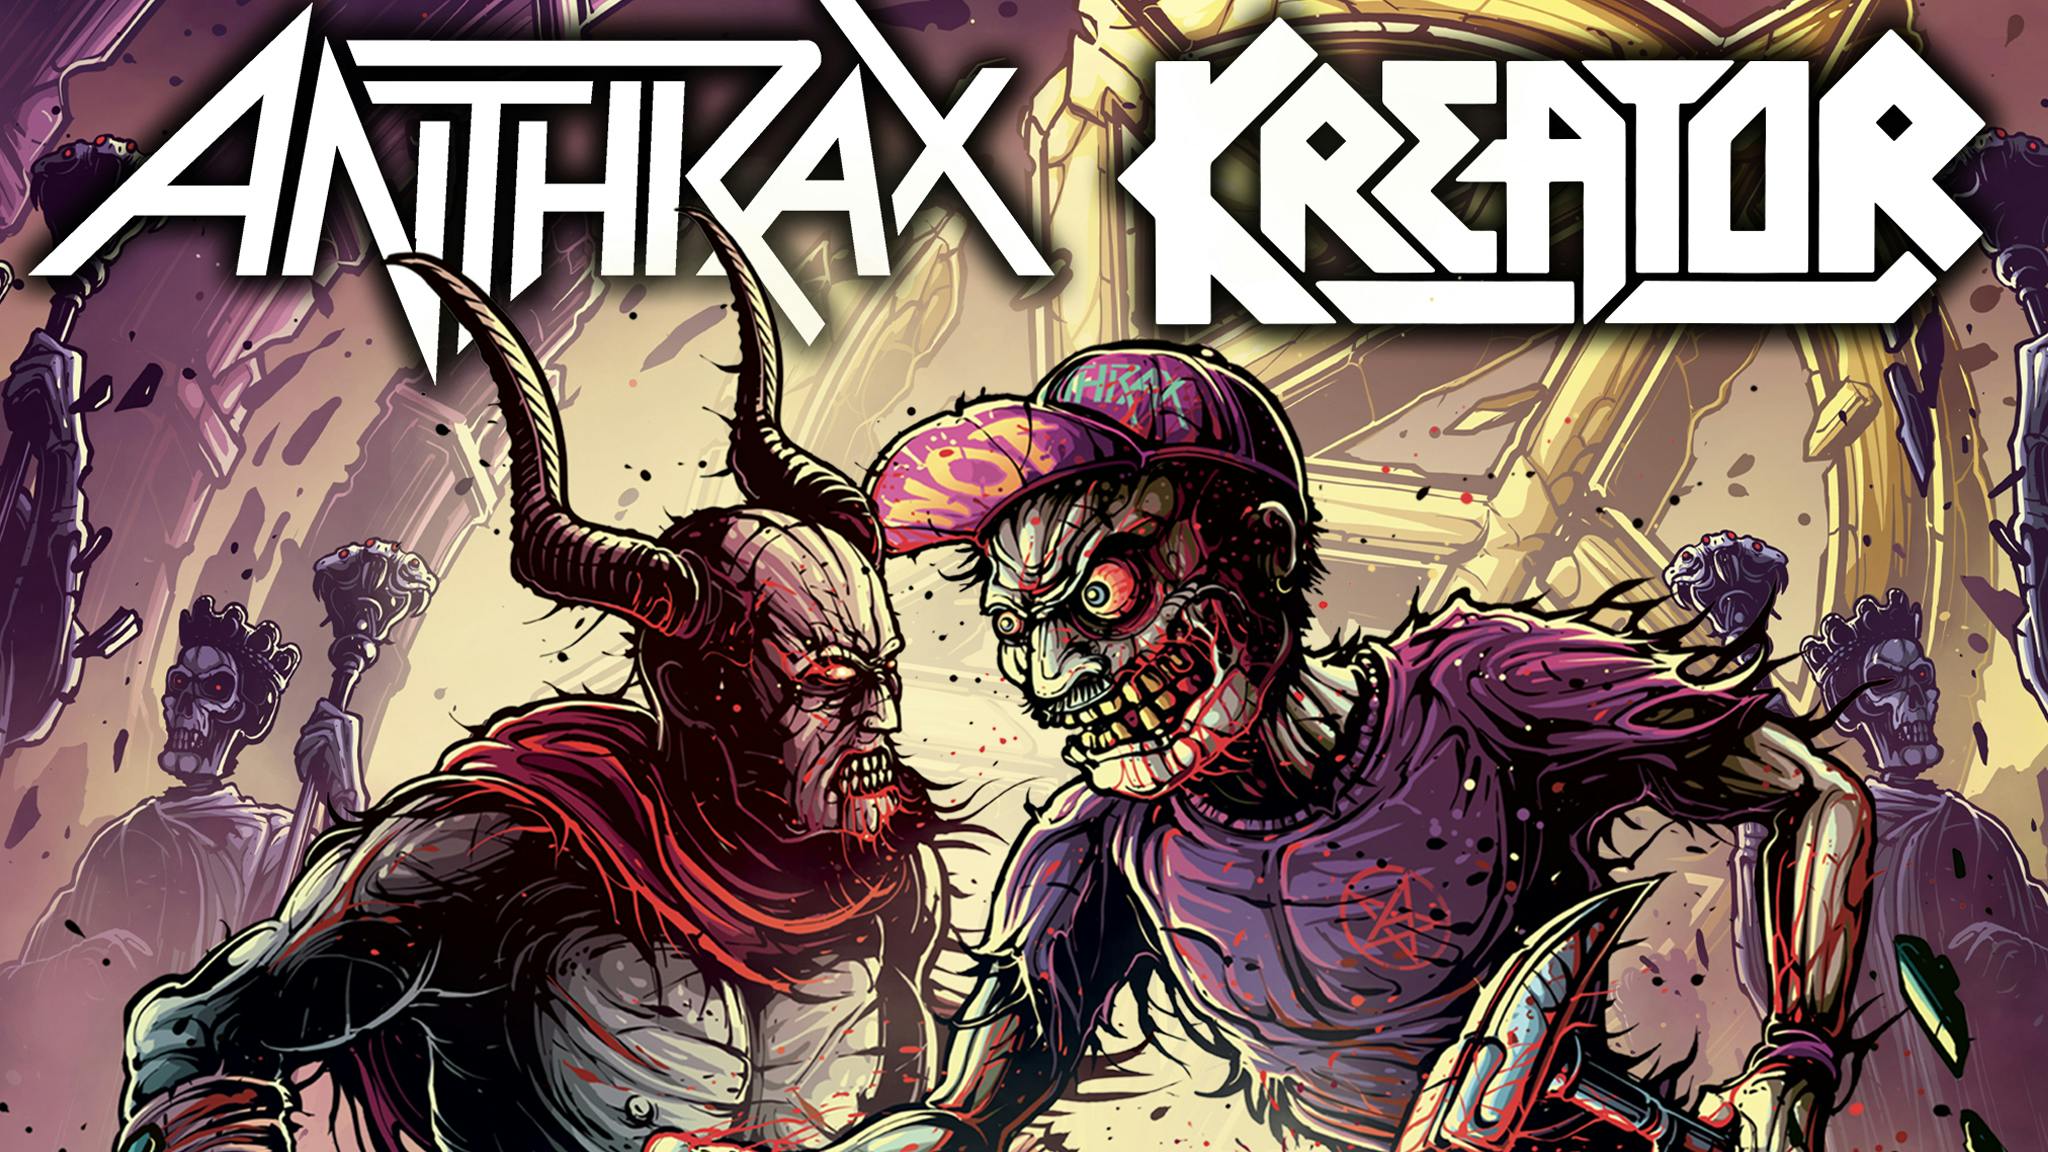 “So much f*cking metal!”: Anthrax and Kreator announce co-headline tour